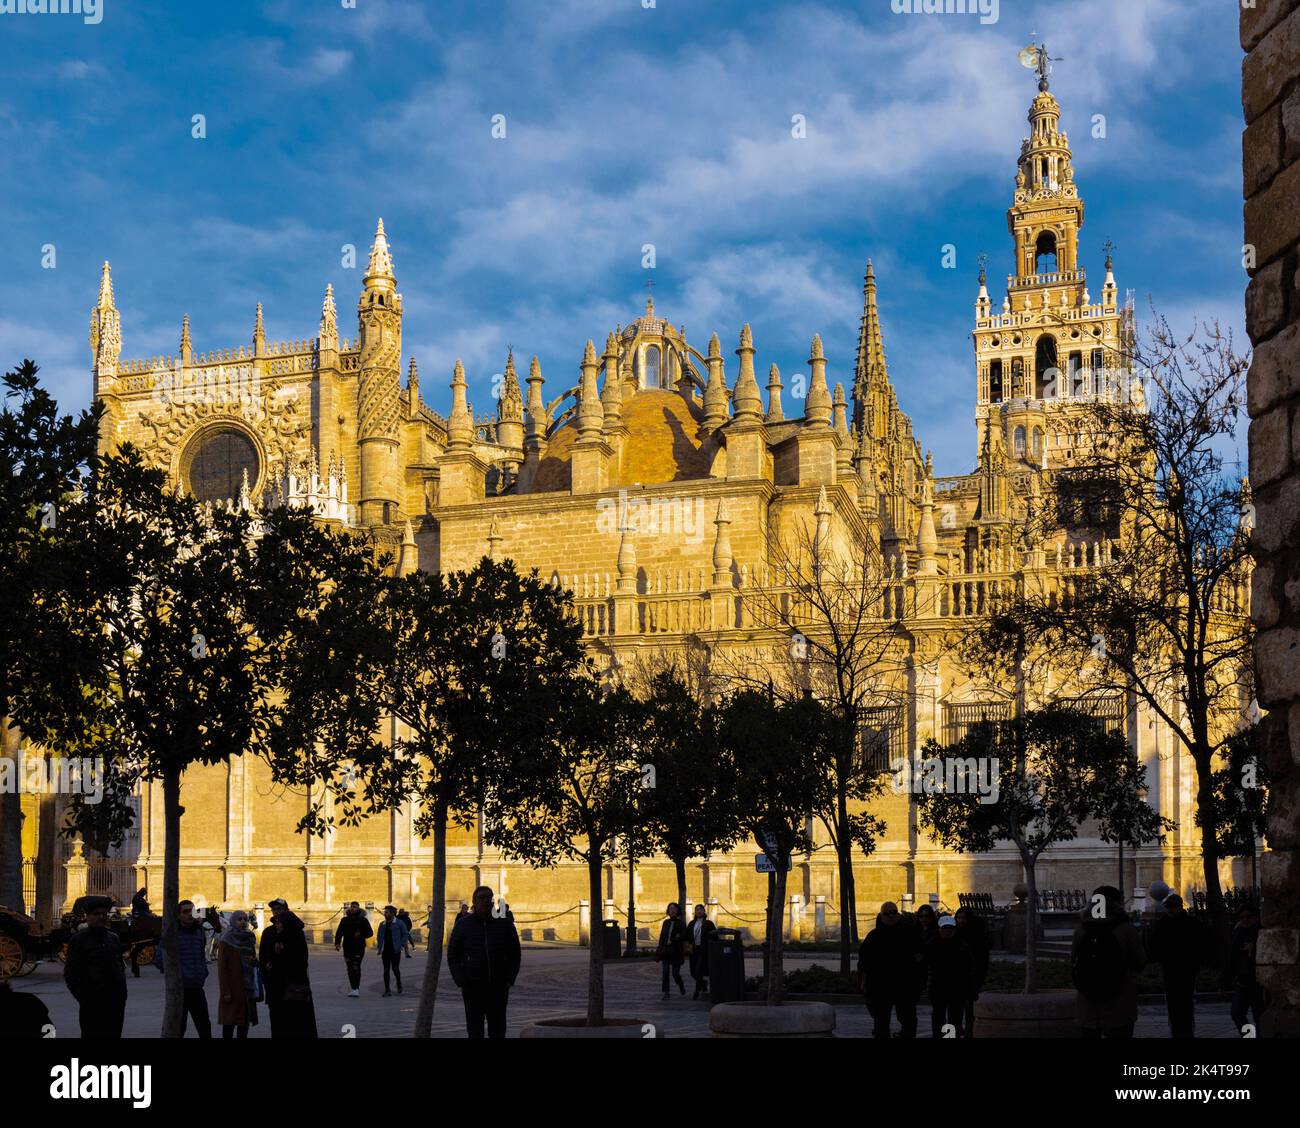 The gothic cathedral, Seville, Seville Province, Andalusia, Spain.  The Giralda tower is on the upper right.  Catedral de Santa María de la Sede/Cathe Stock Photo